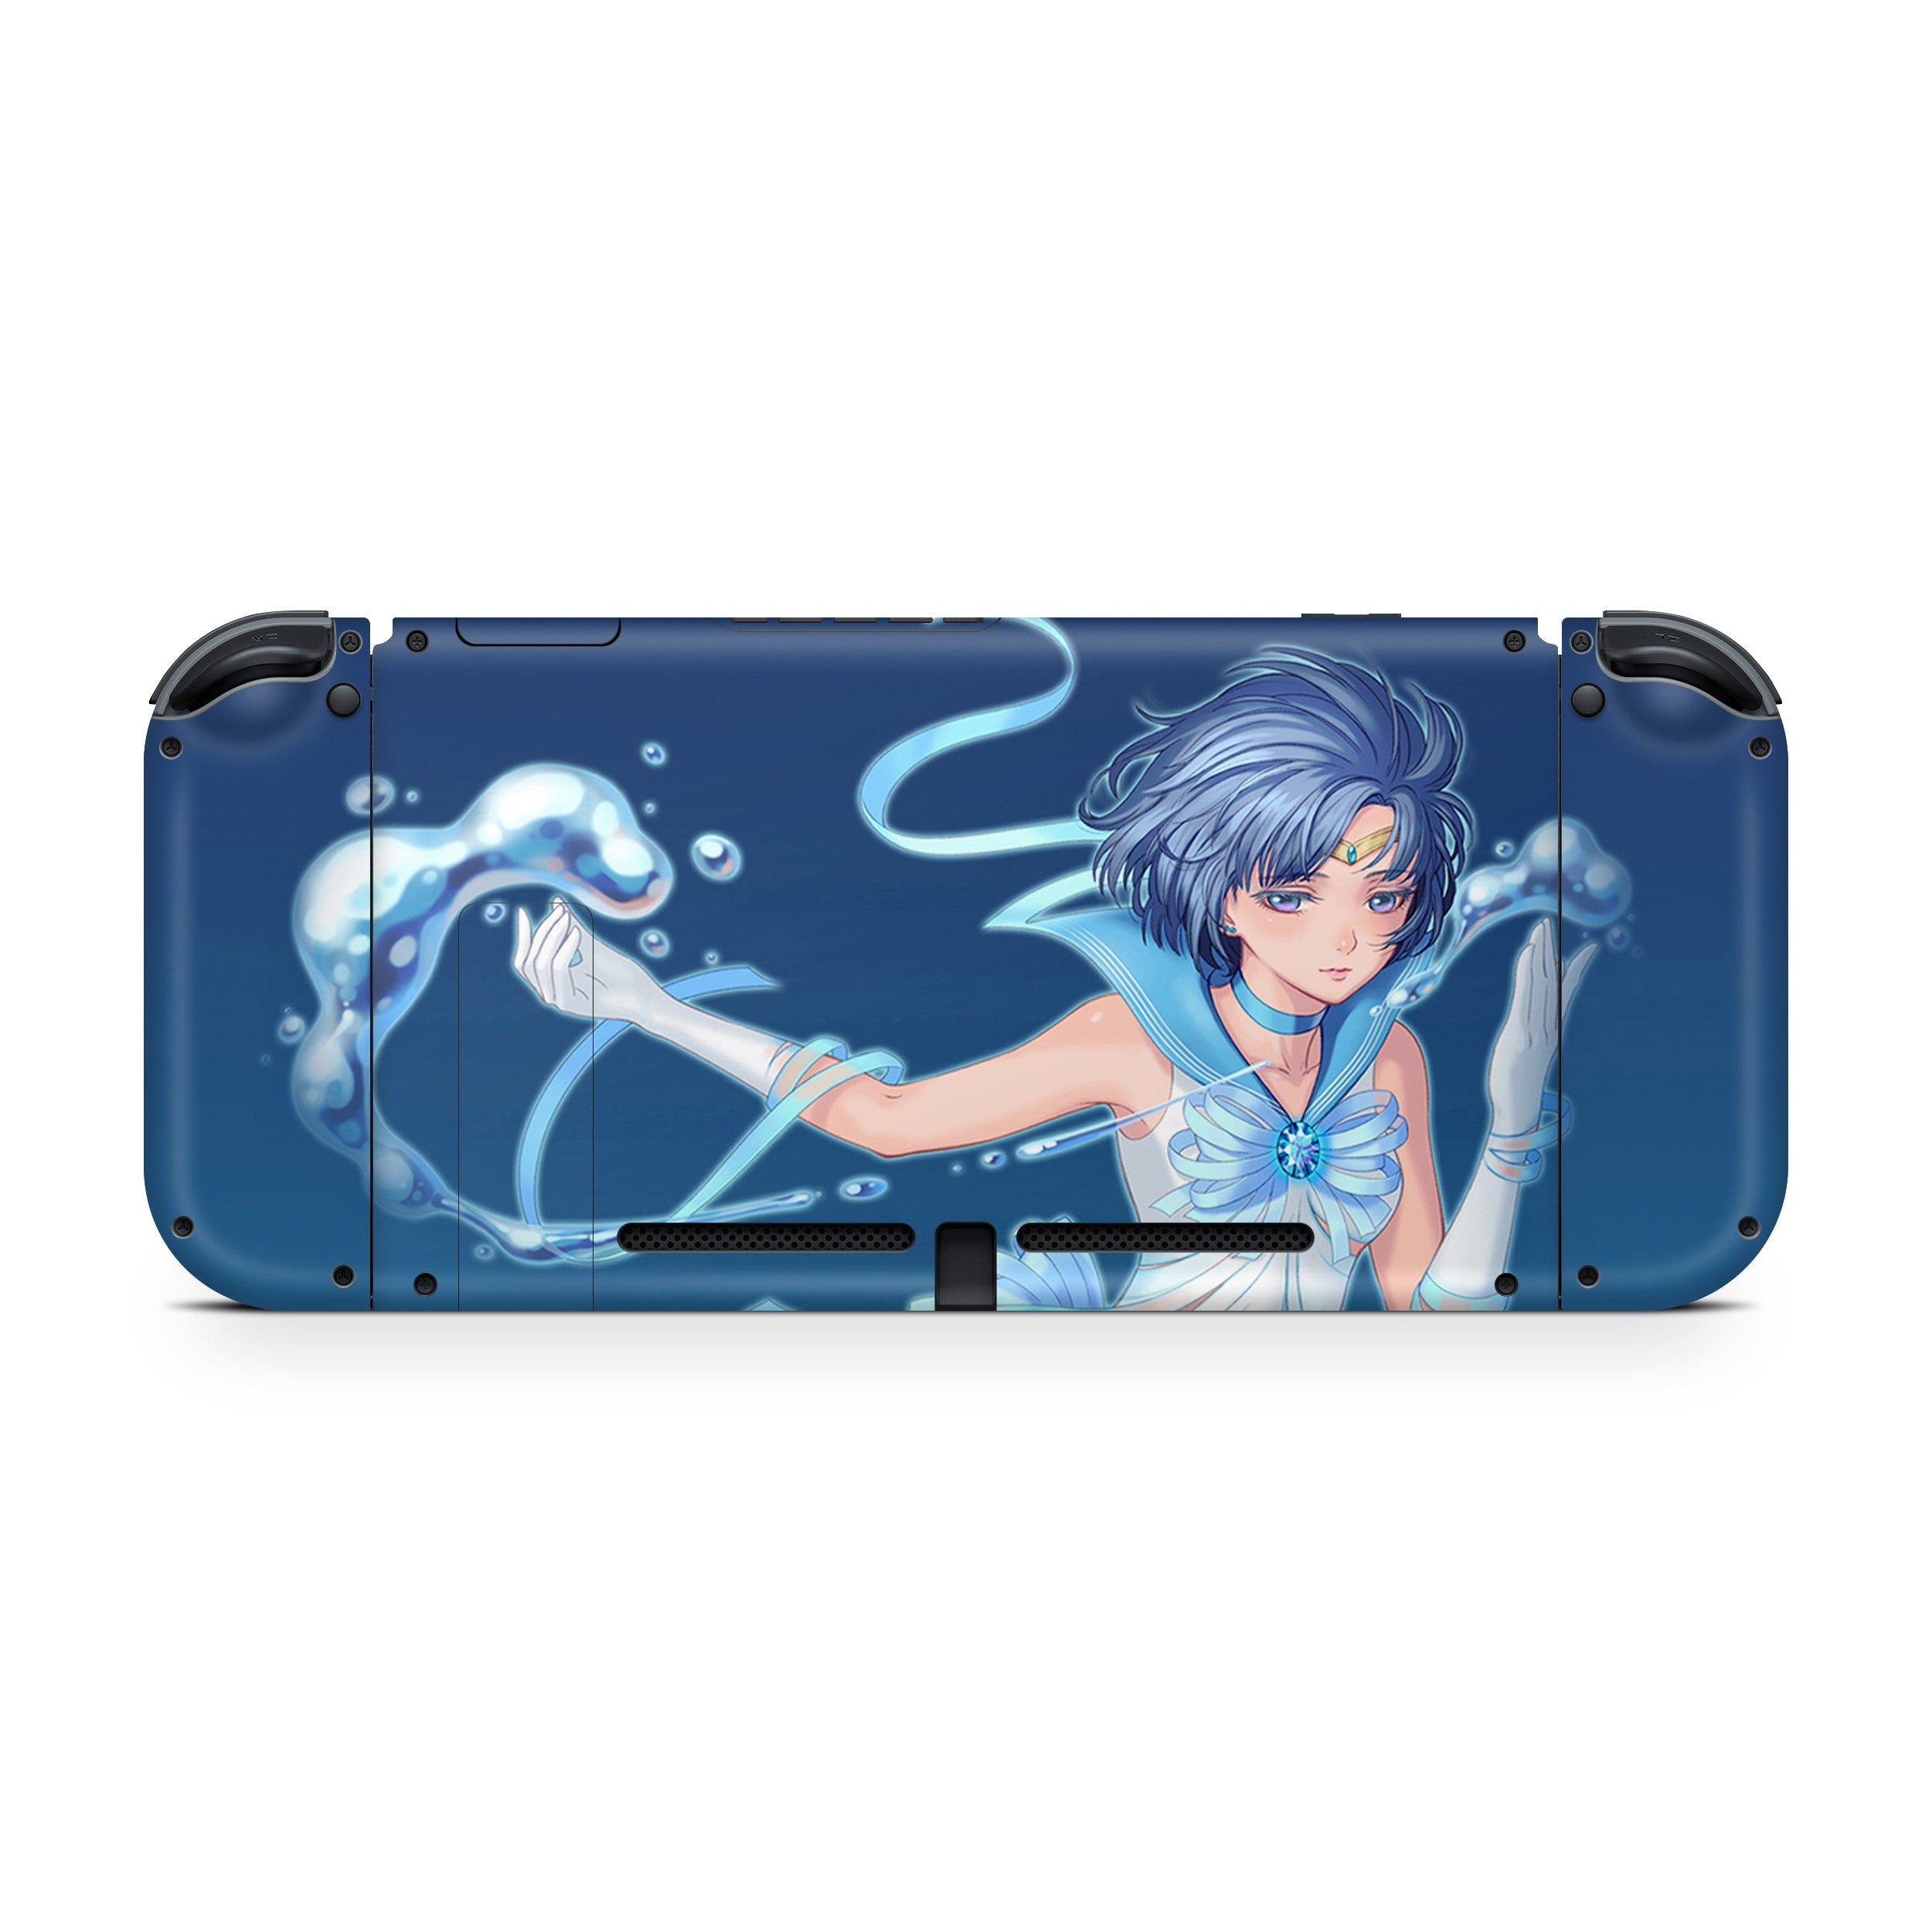 A video game skin featuring a Sailor Moon Mercury design for the Nintendo Switch.